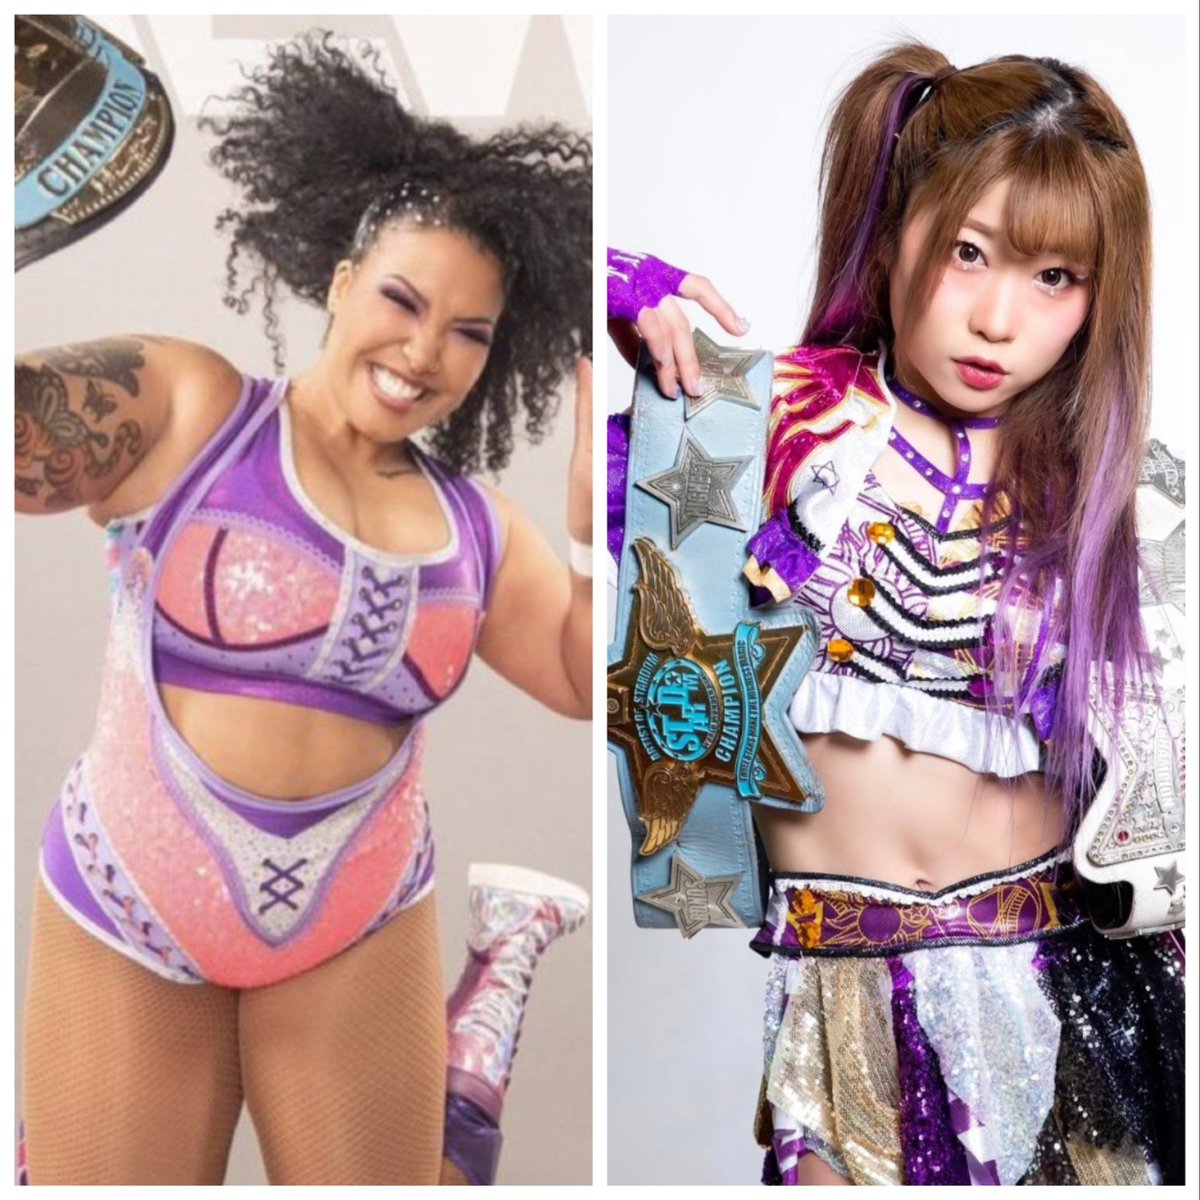 STARDOM’s Tam Nakano just teased a future match with AEW TBS Women’s Champion Willow Nightingale!